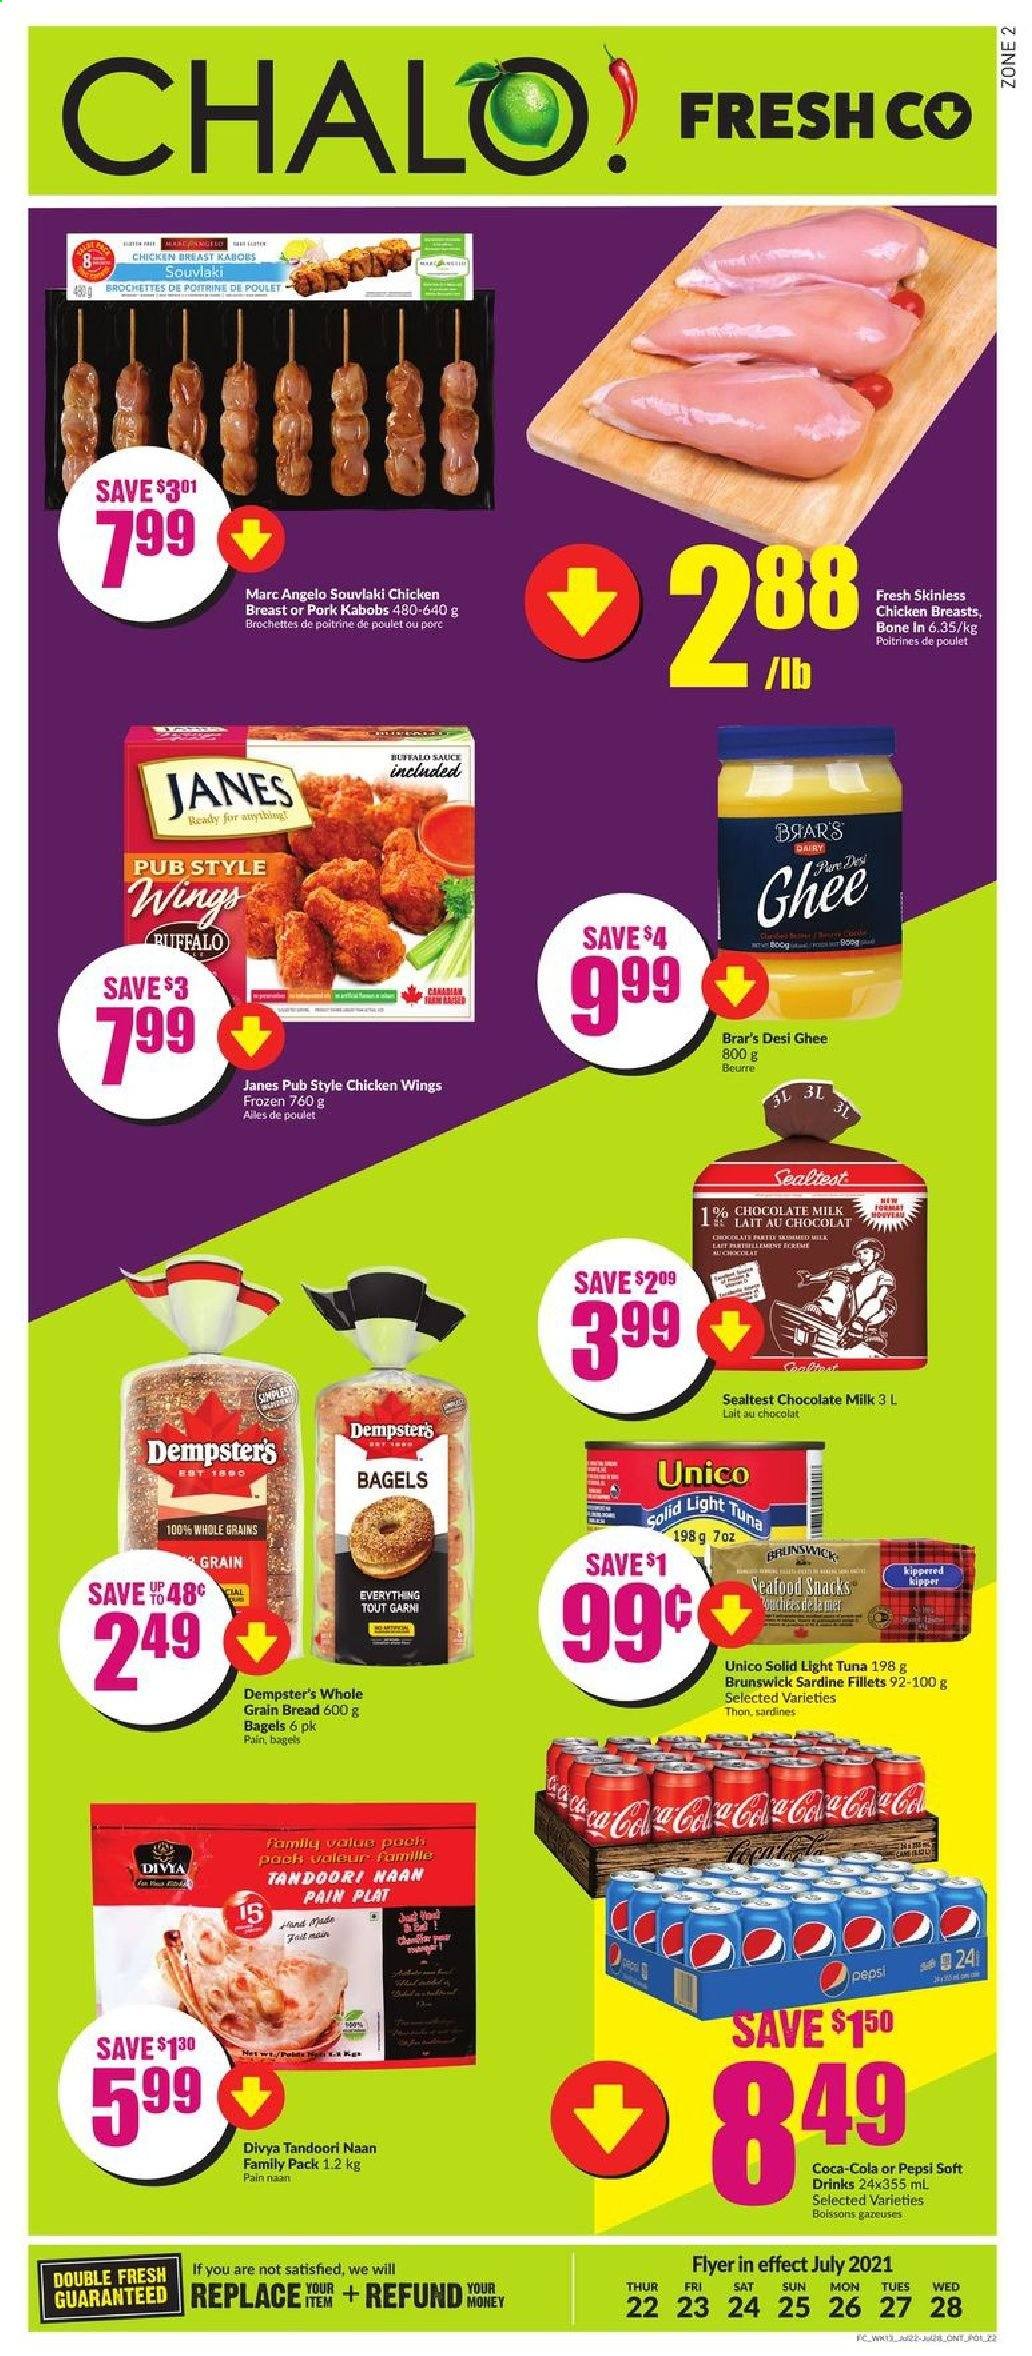 thumbnail - Chalo! FreshCo. Flyer - July 22, 2021 - July 28, 2021 - Sales products - bagels, bread, sardines, tuna, seafood, sauce, milk, ghee, chicken wings, milk chocolate, chocolate, snack, light tuna, Coca-Cola, Pepsi, soft drink, chicken breasts, chicken. Page 1.